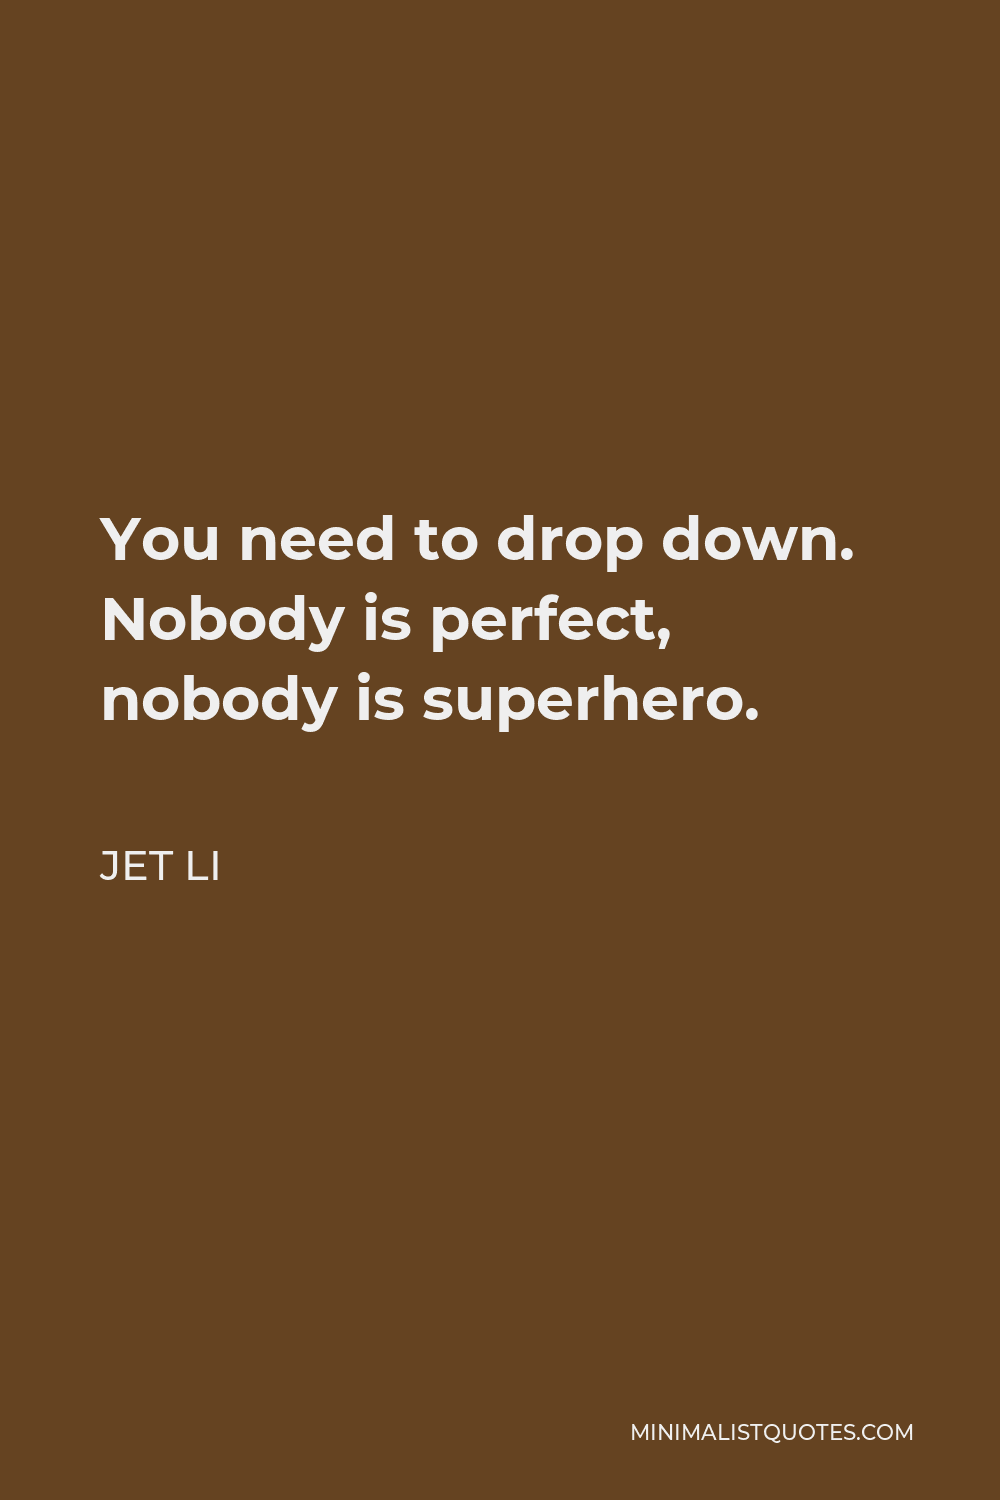 Jet Li Quote - You need to drop down. Nobody is perfect, nobody is superhero.